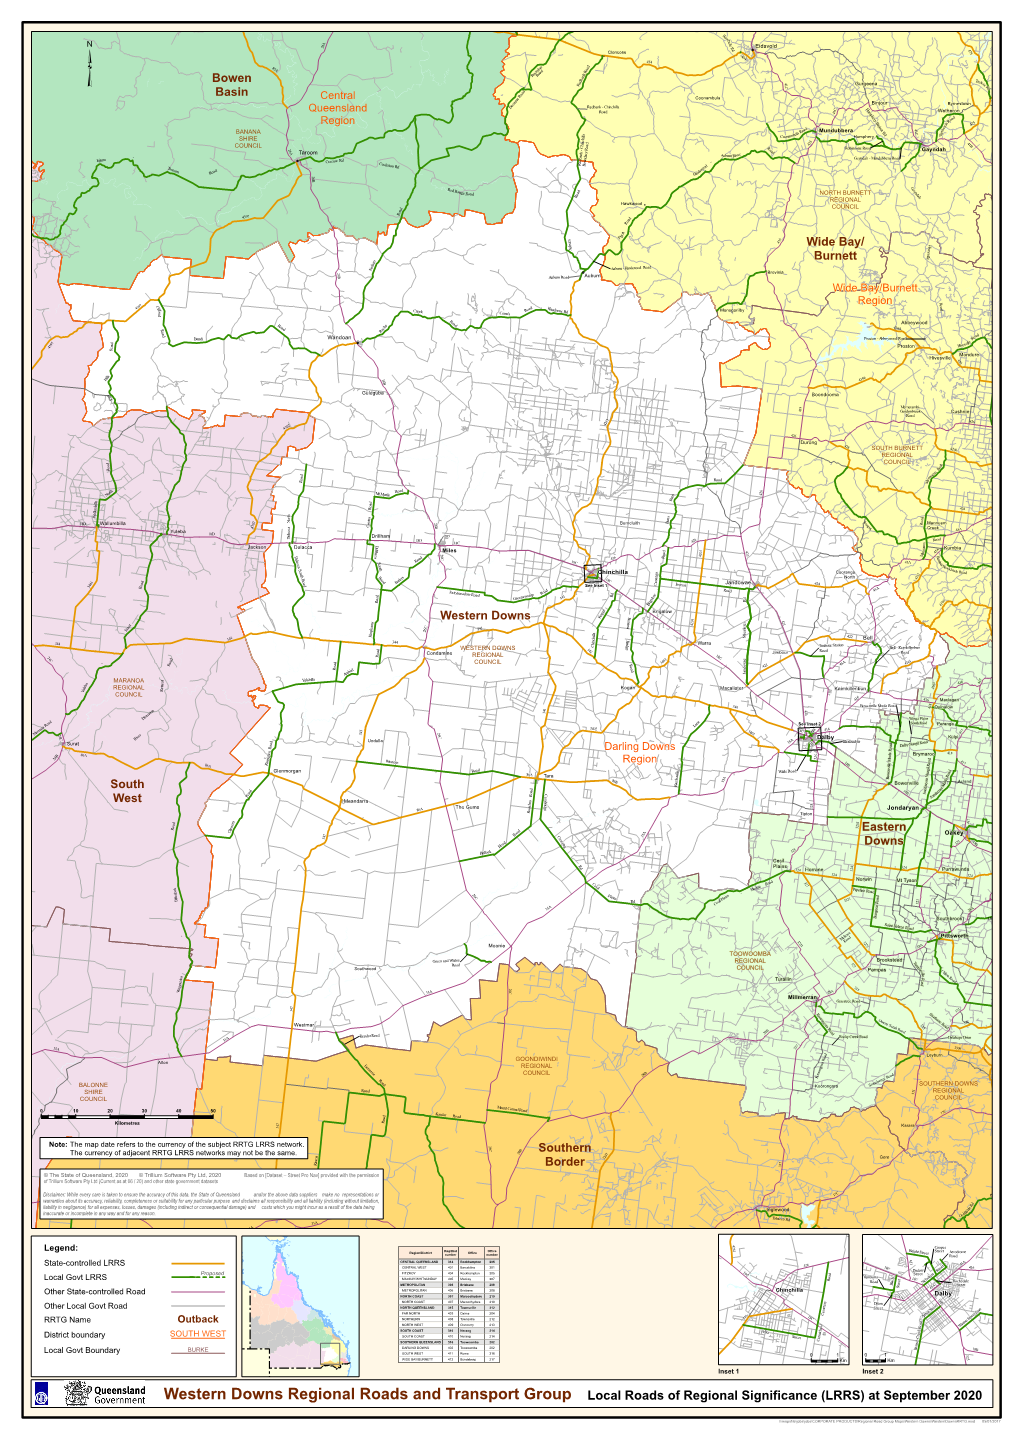 Western Downs Regional Roads and Transport Group Local Roads of Regional Significance (LRRS) at September 2020